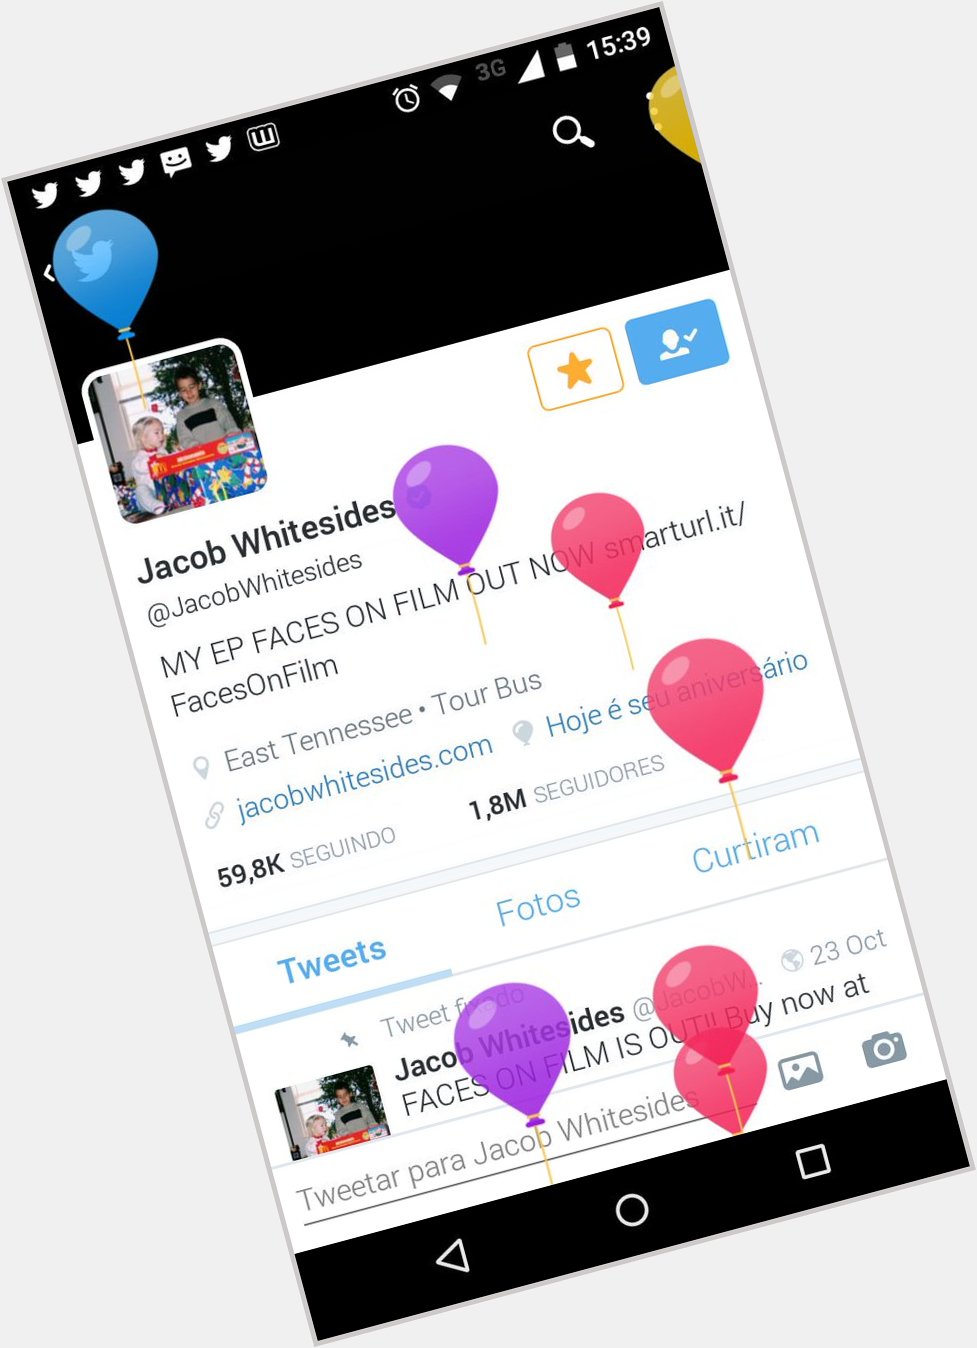  awwwn this is so cutee.
Happy birthday Jacob. Brazil loves you I\M PROUD OF YOU JACOB WHITESIDES 